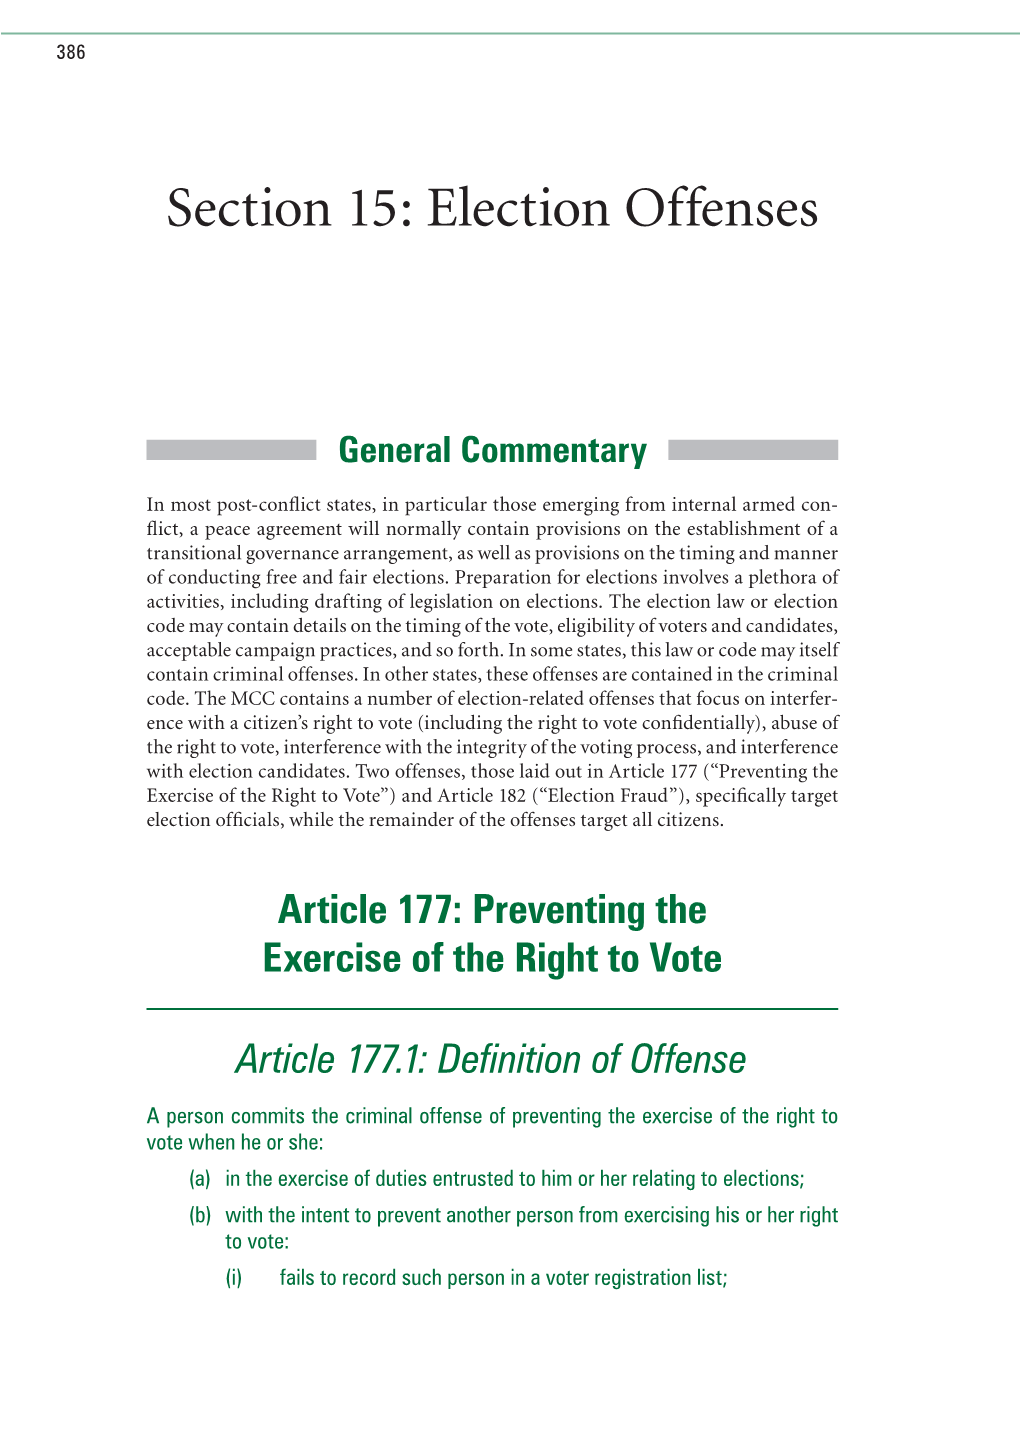 Section 15: Election Offenses